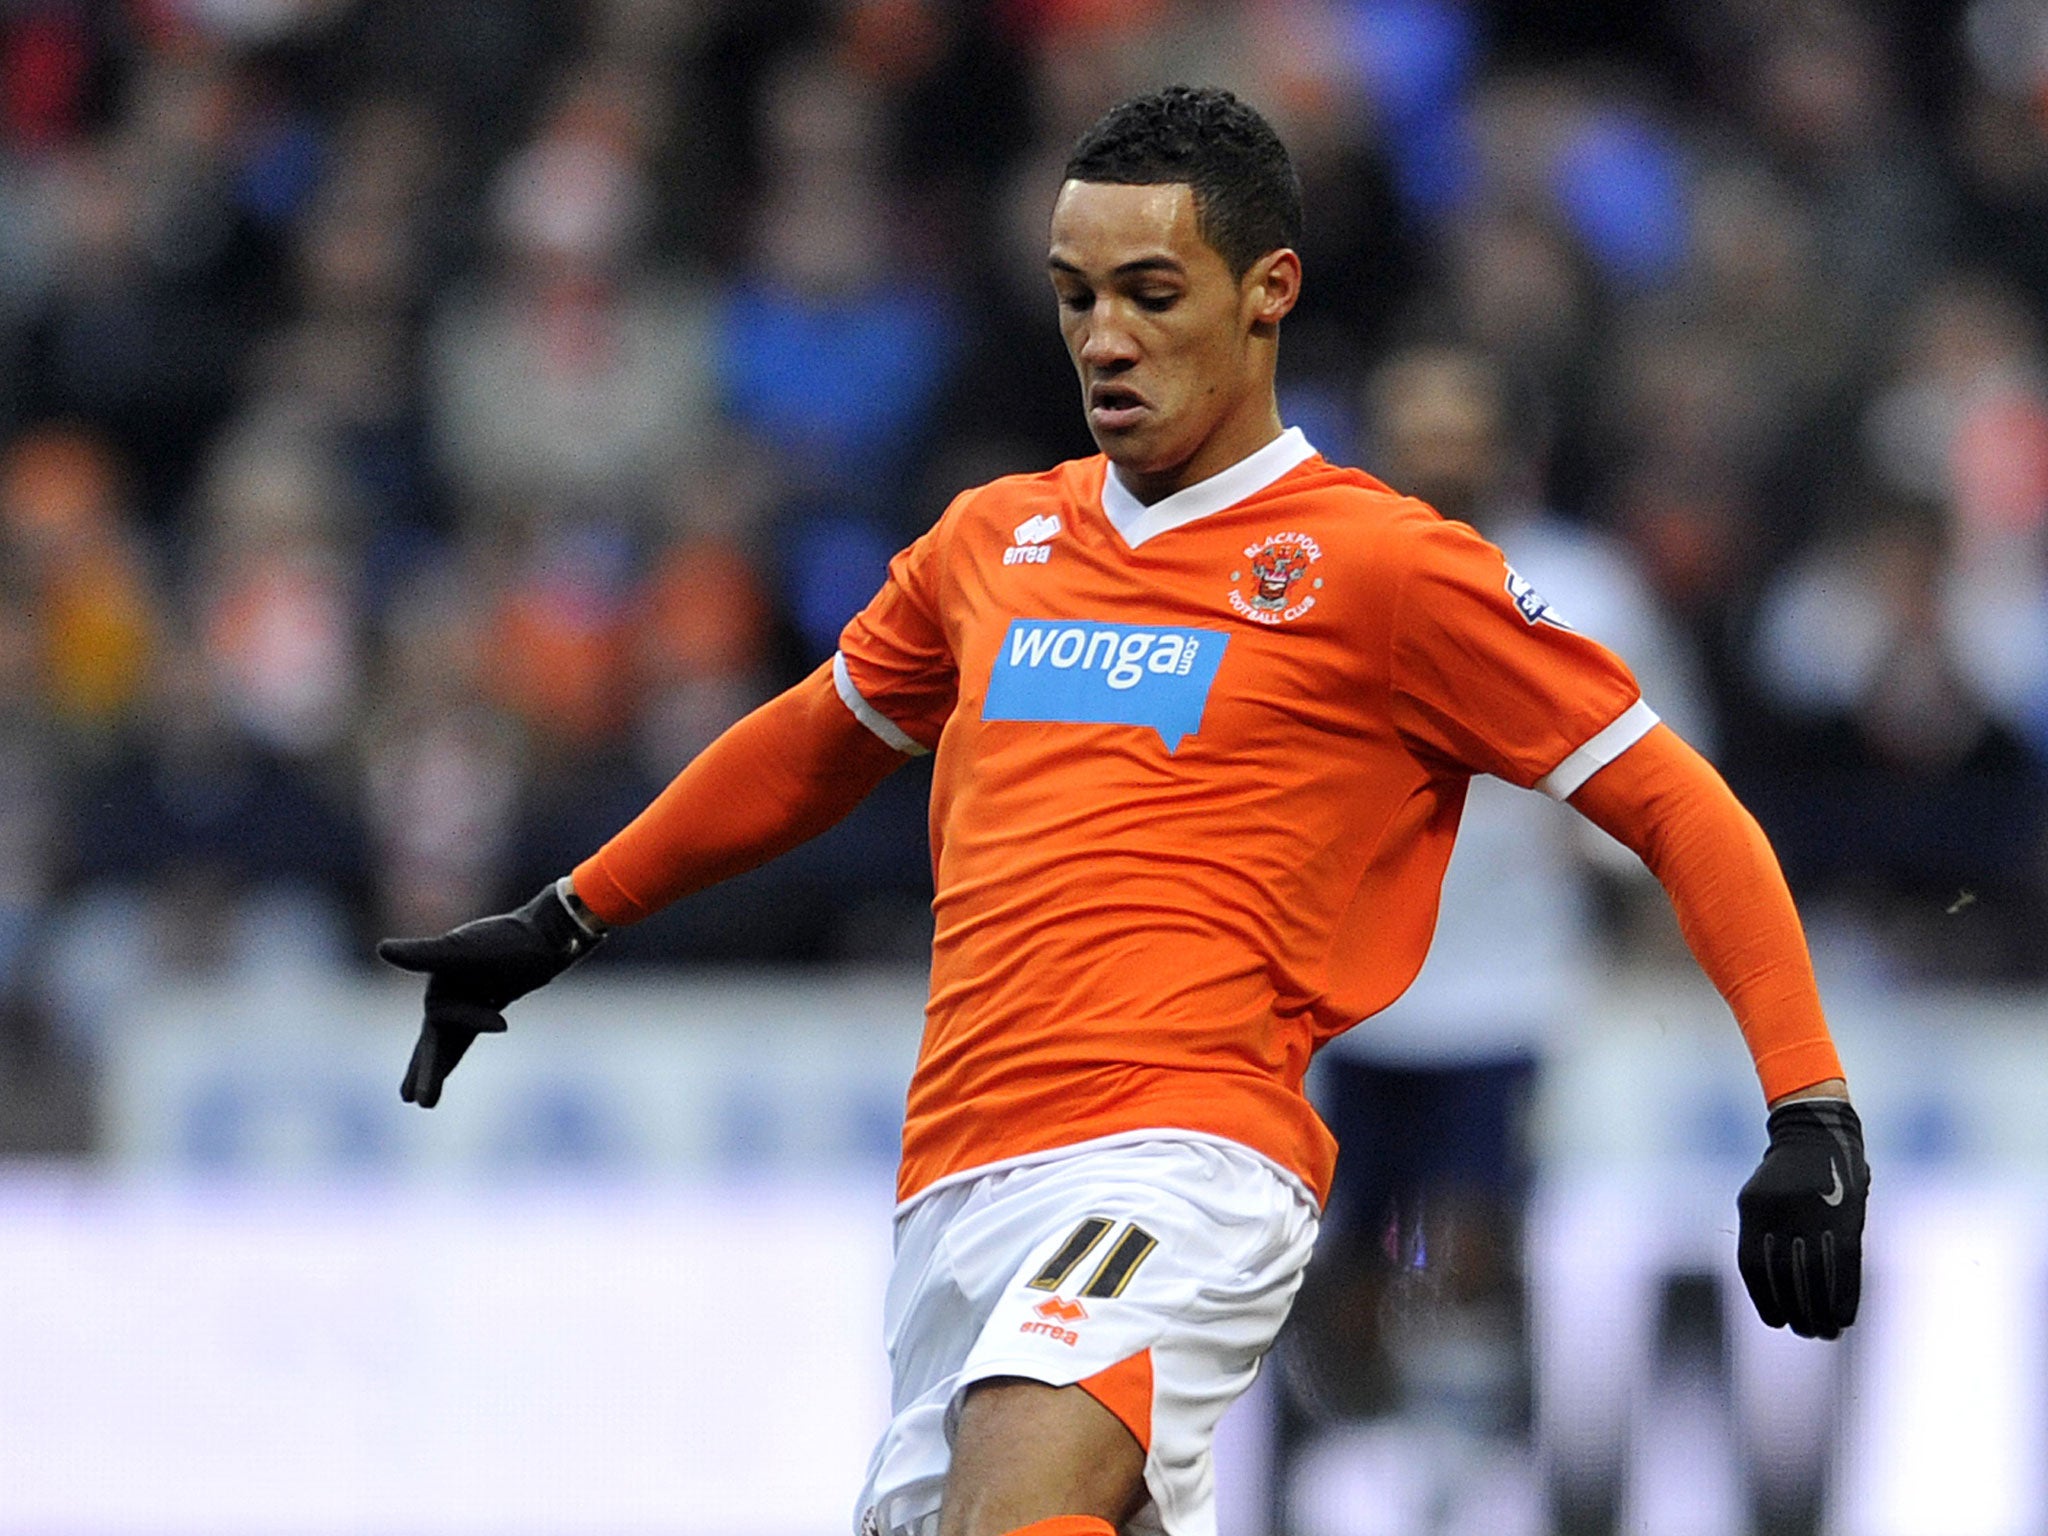 Blackpool winger Tom Ince is due to have talks with Swansea City about a possible loan move